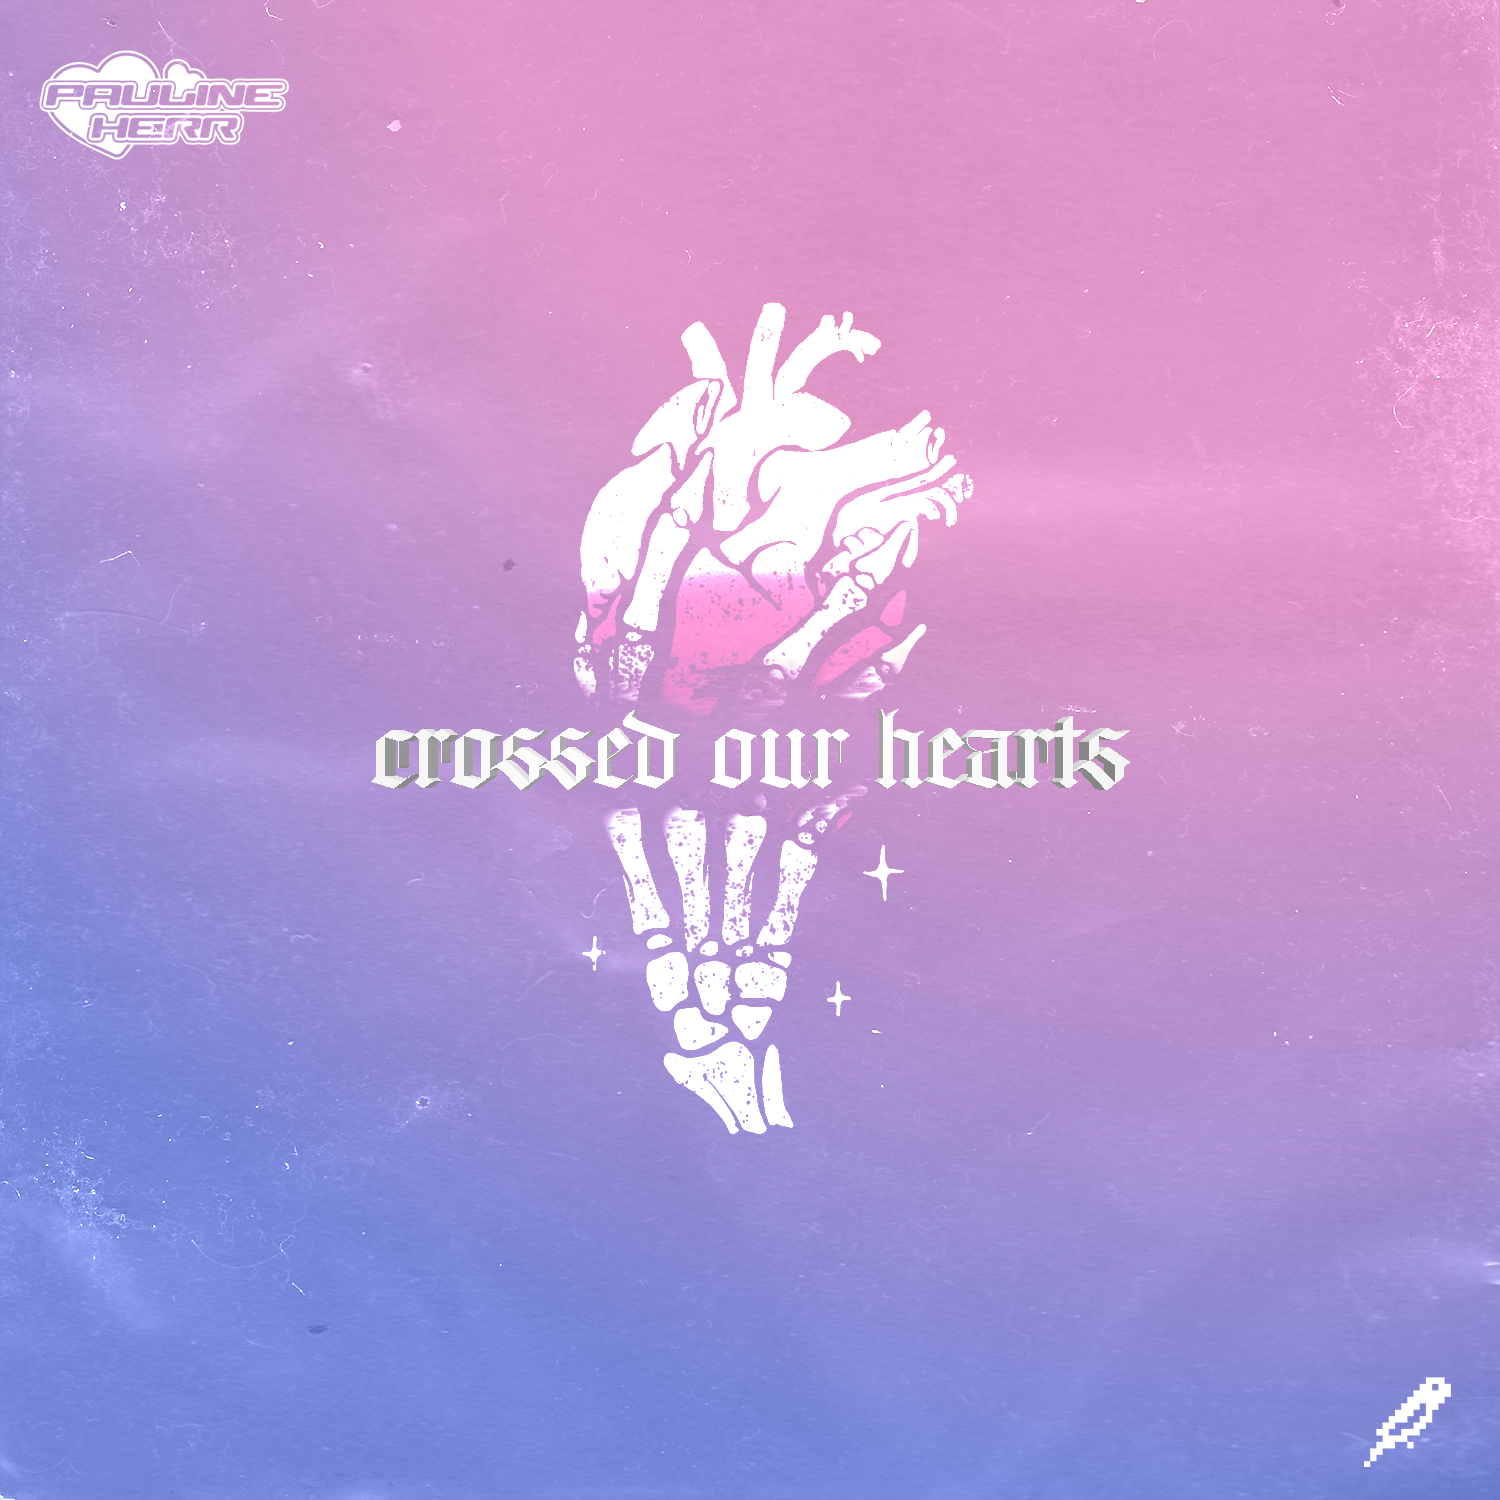 Crossed Our Hearts